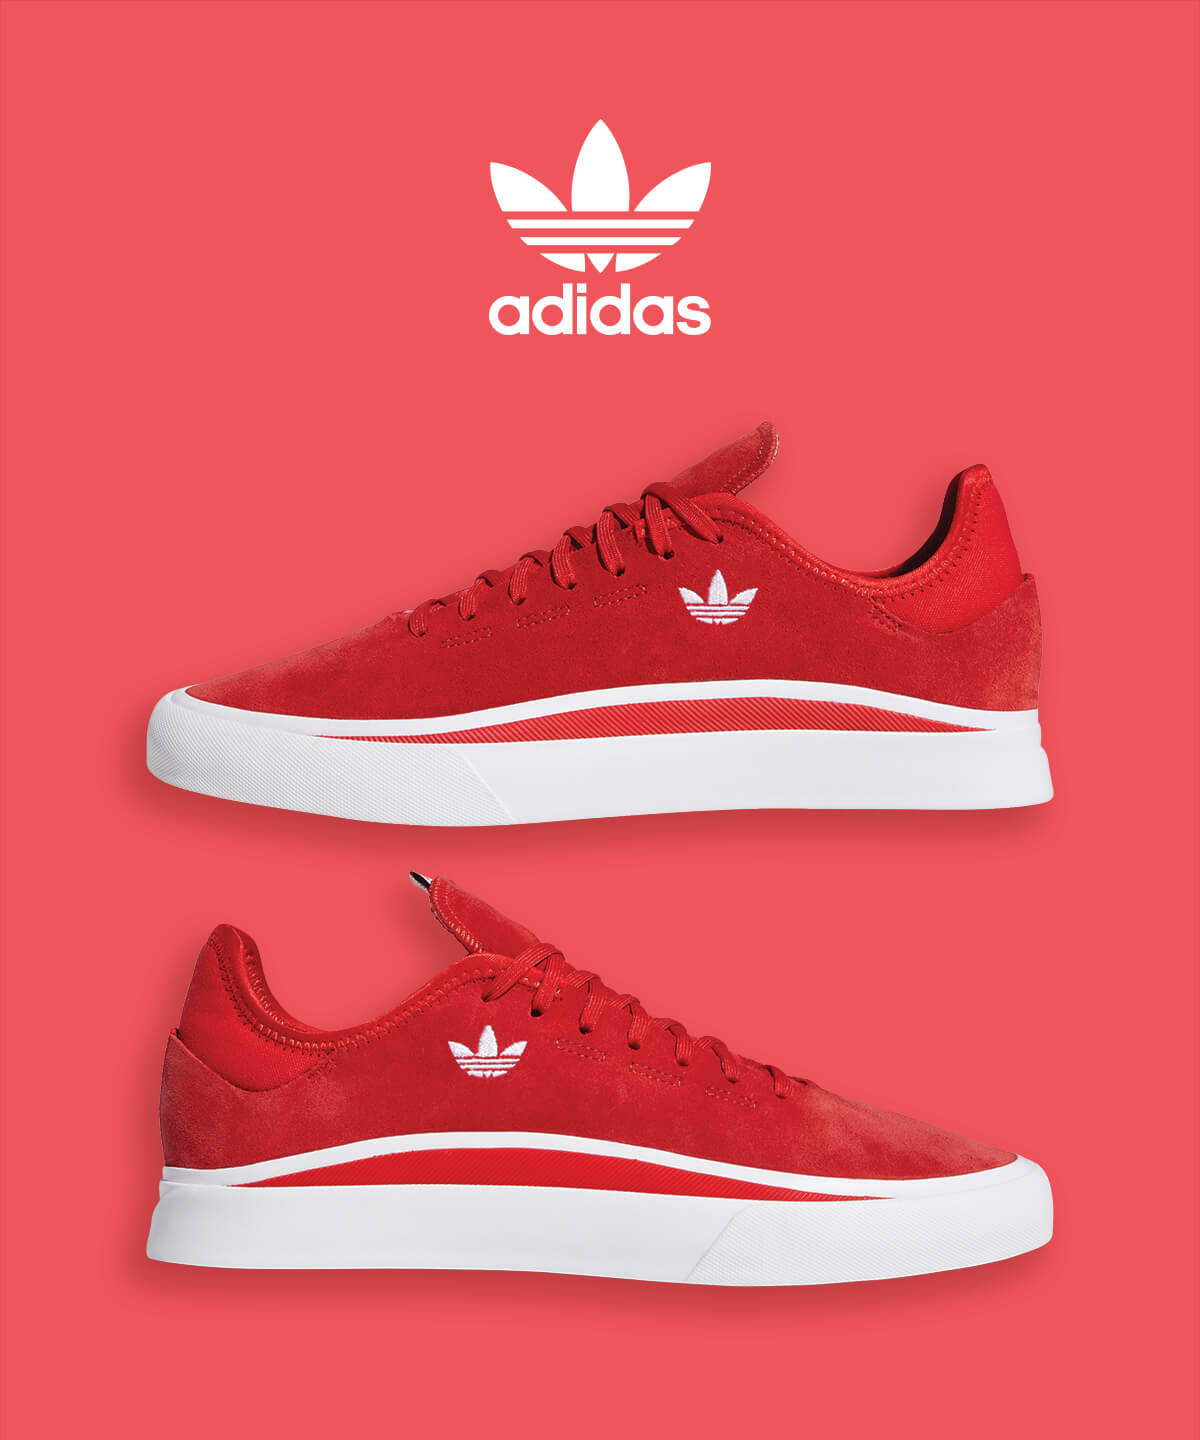 NEW SHOES FROM ADIDAS AND MORE - SHOP NEW SHOES